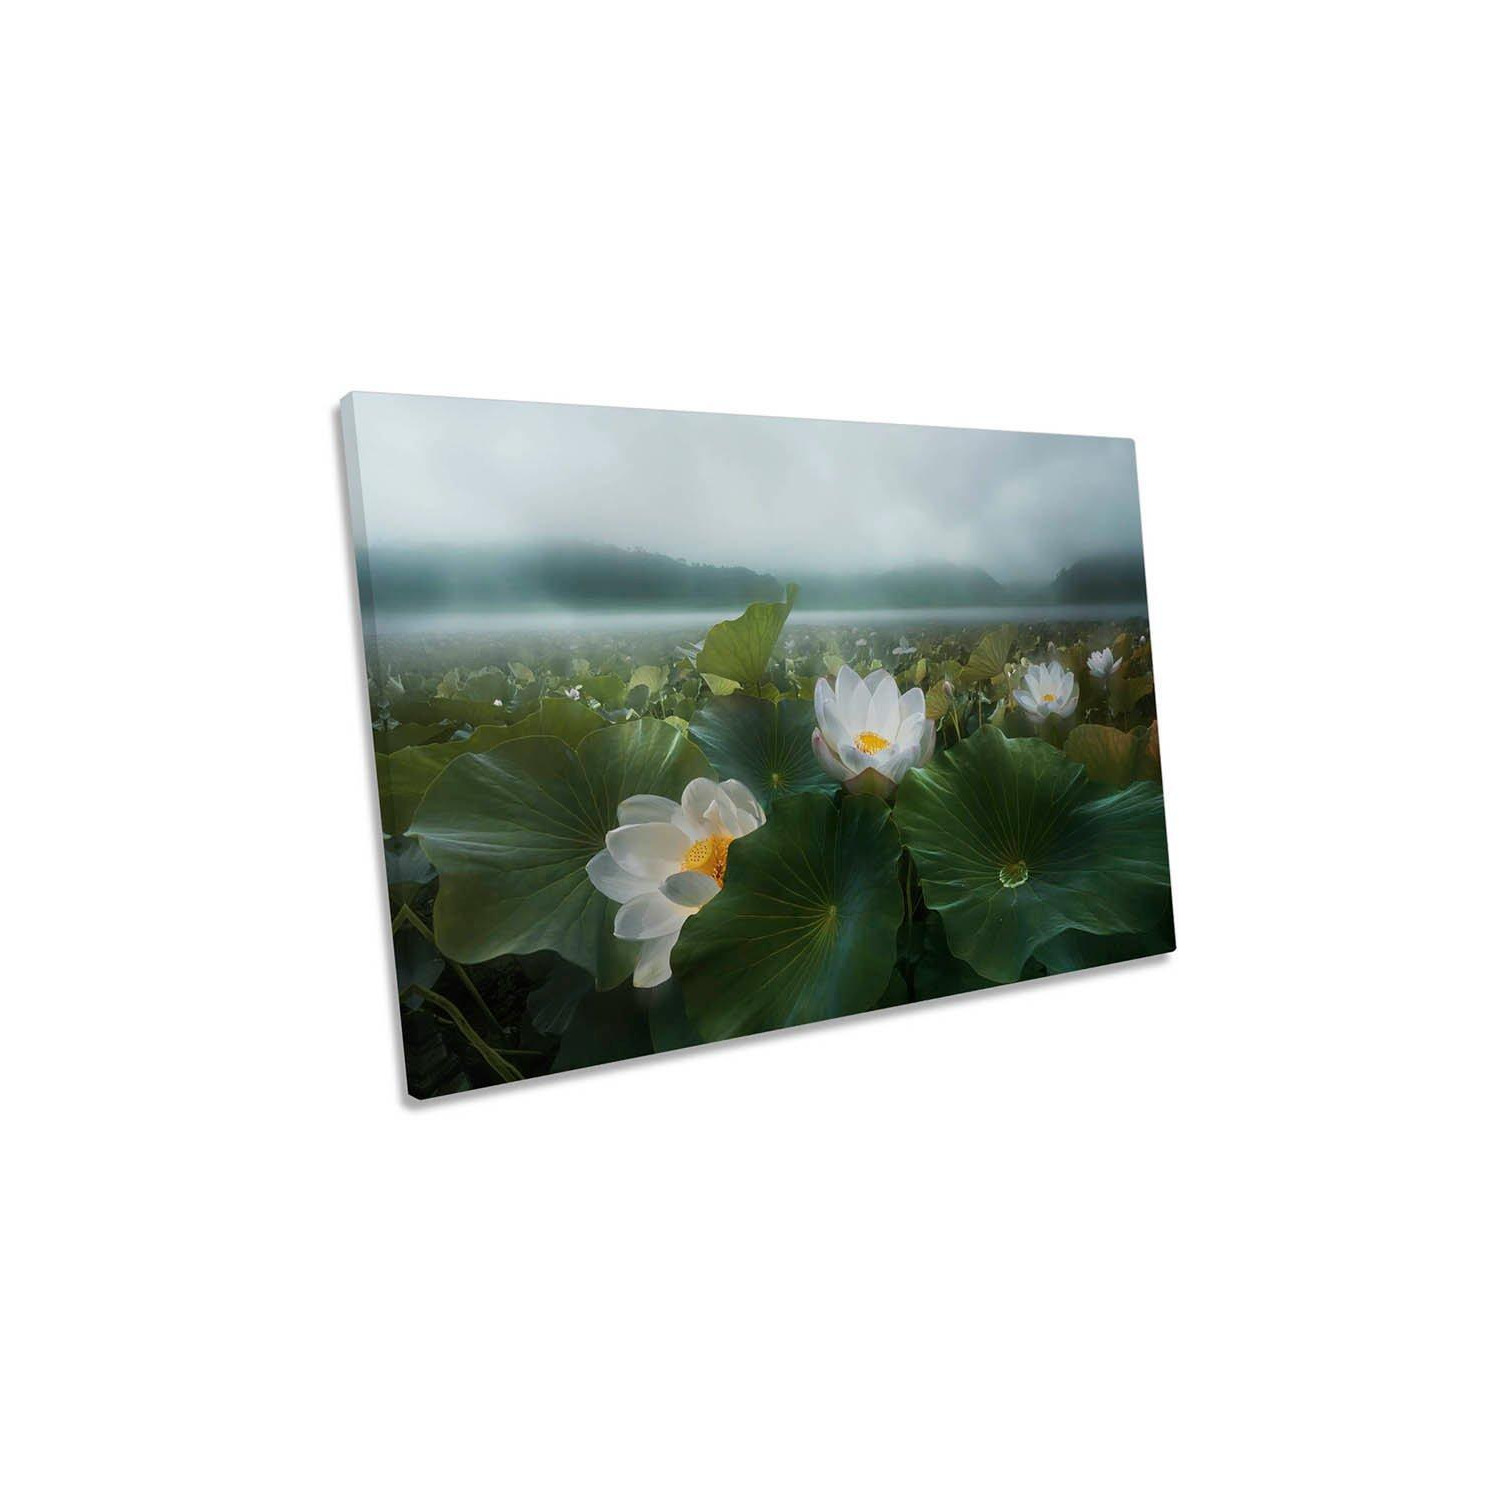 The Morning Rain Water Lilies Canvas Wall Art Picture Print - image 1